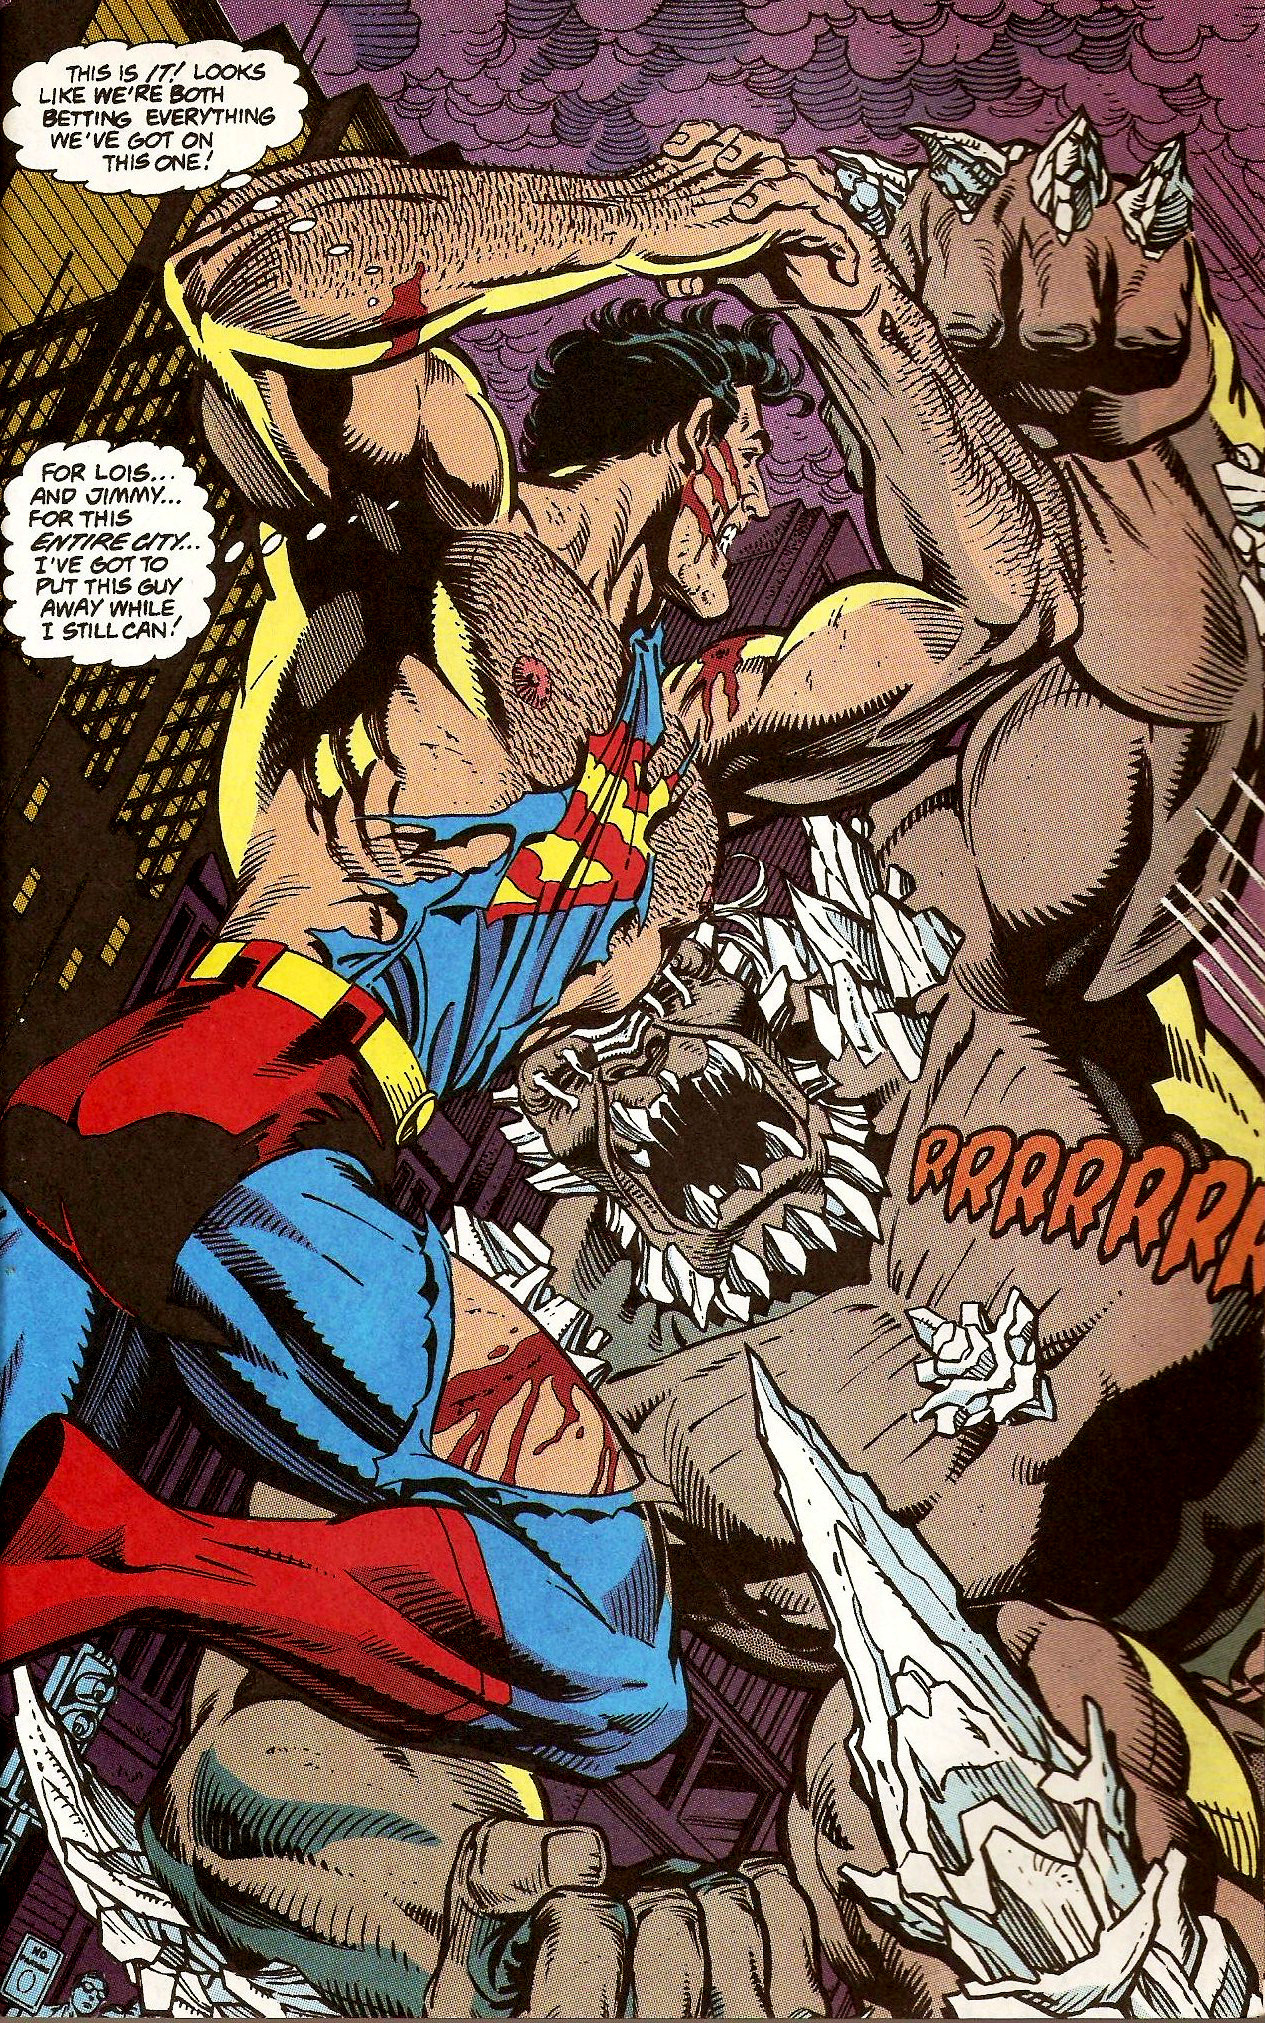 From Superman (Vol. 2) #75 (1993)